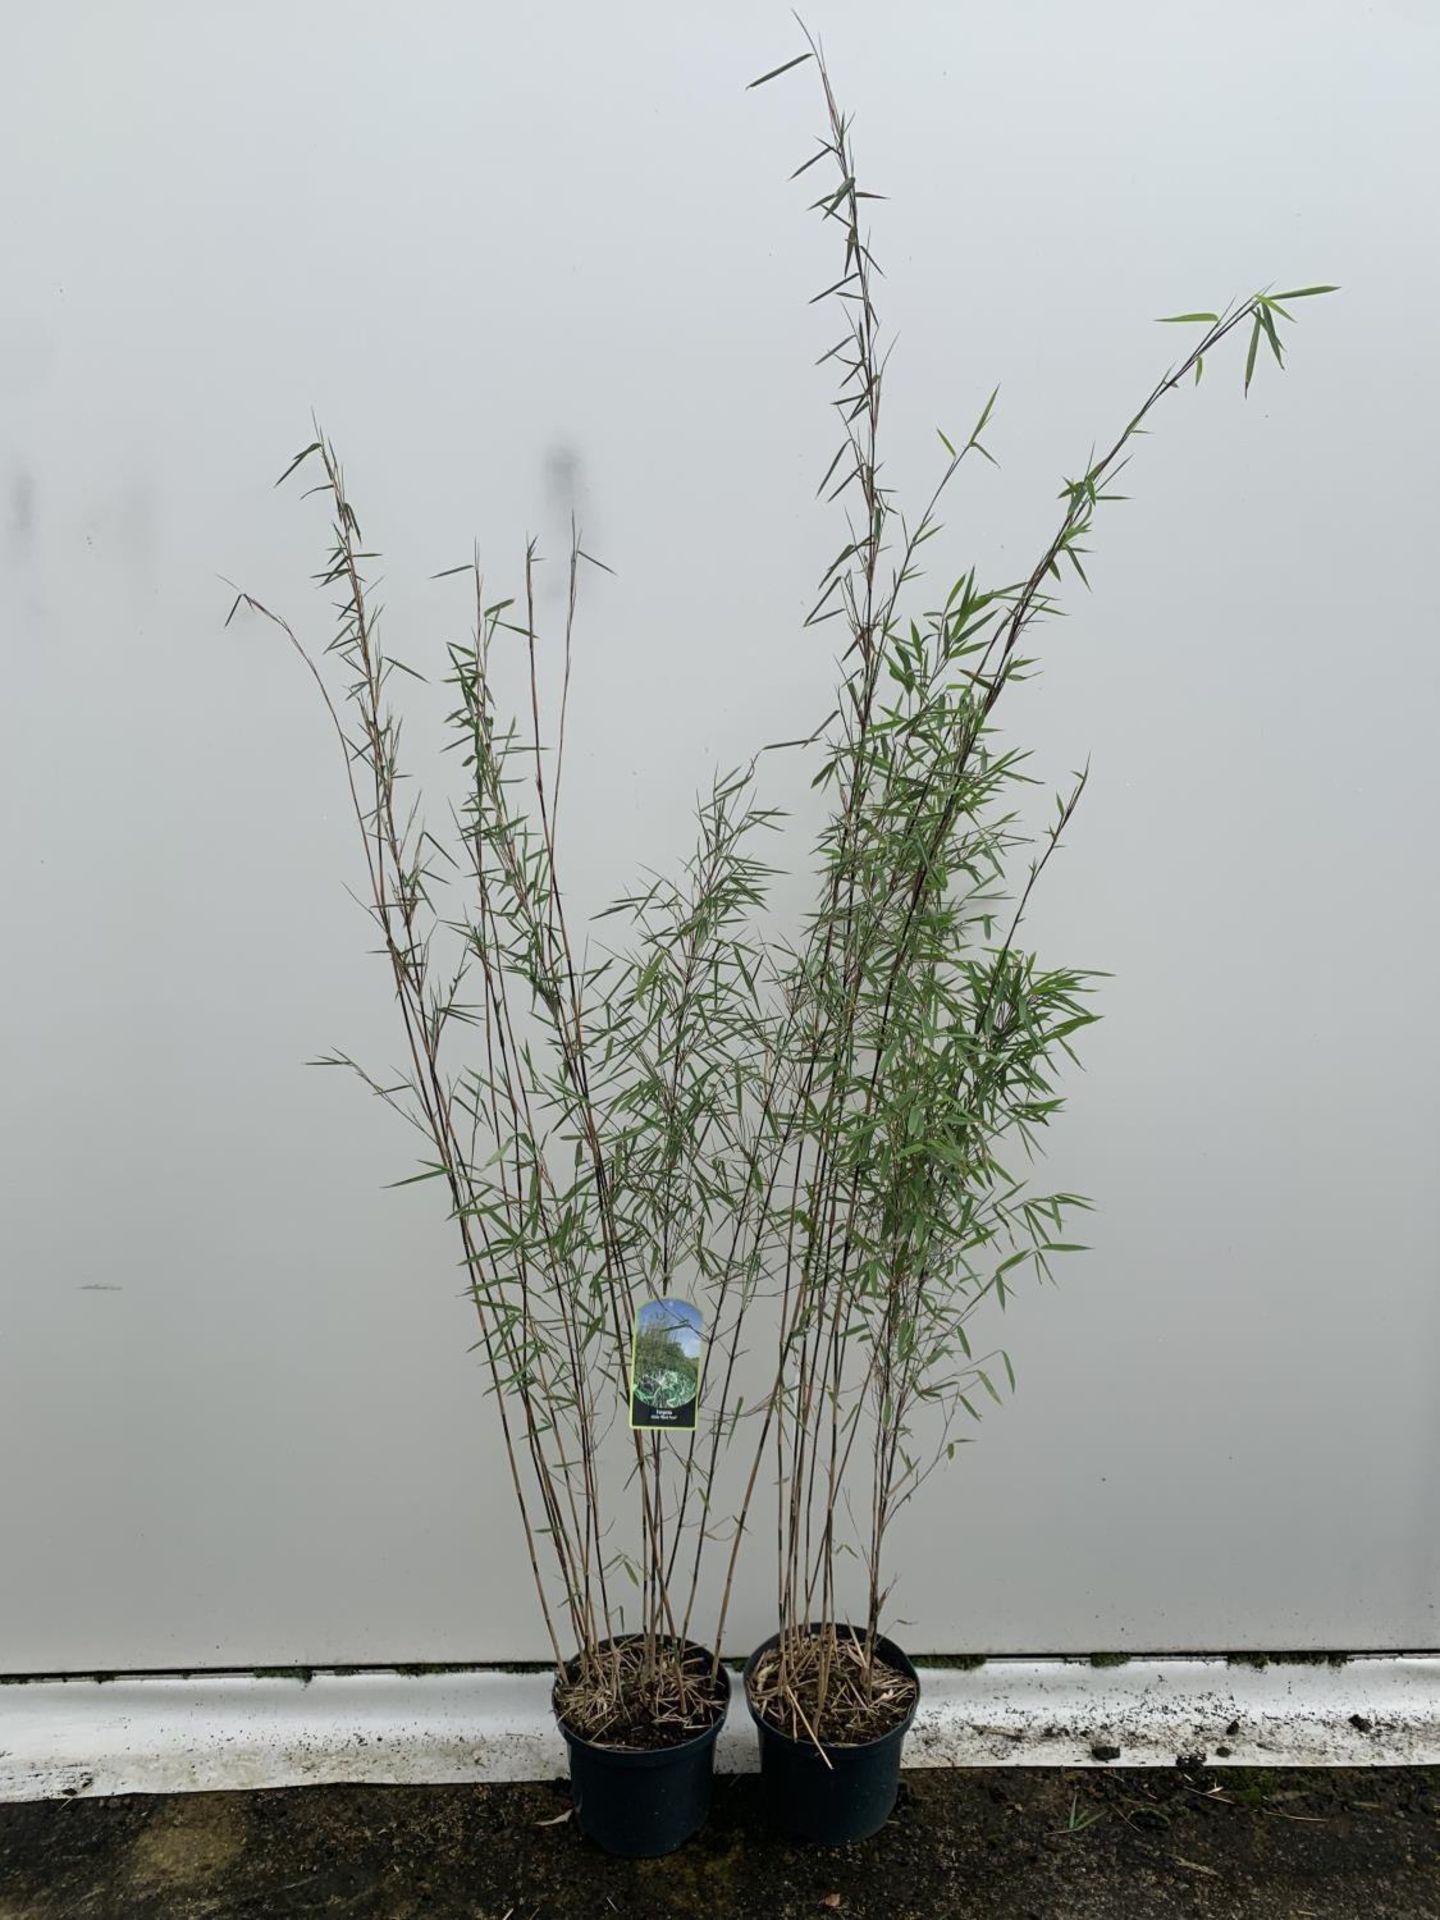 TWO BAMBOO FARGESIA NITIDA 'BLACK PEARL' APPROX 190CM IN HEIGHT IN 5 LTR POTS PLUS VAT TO BE SOLD - Image 4 of 5